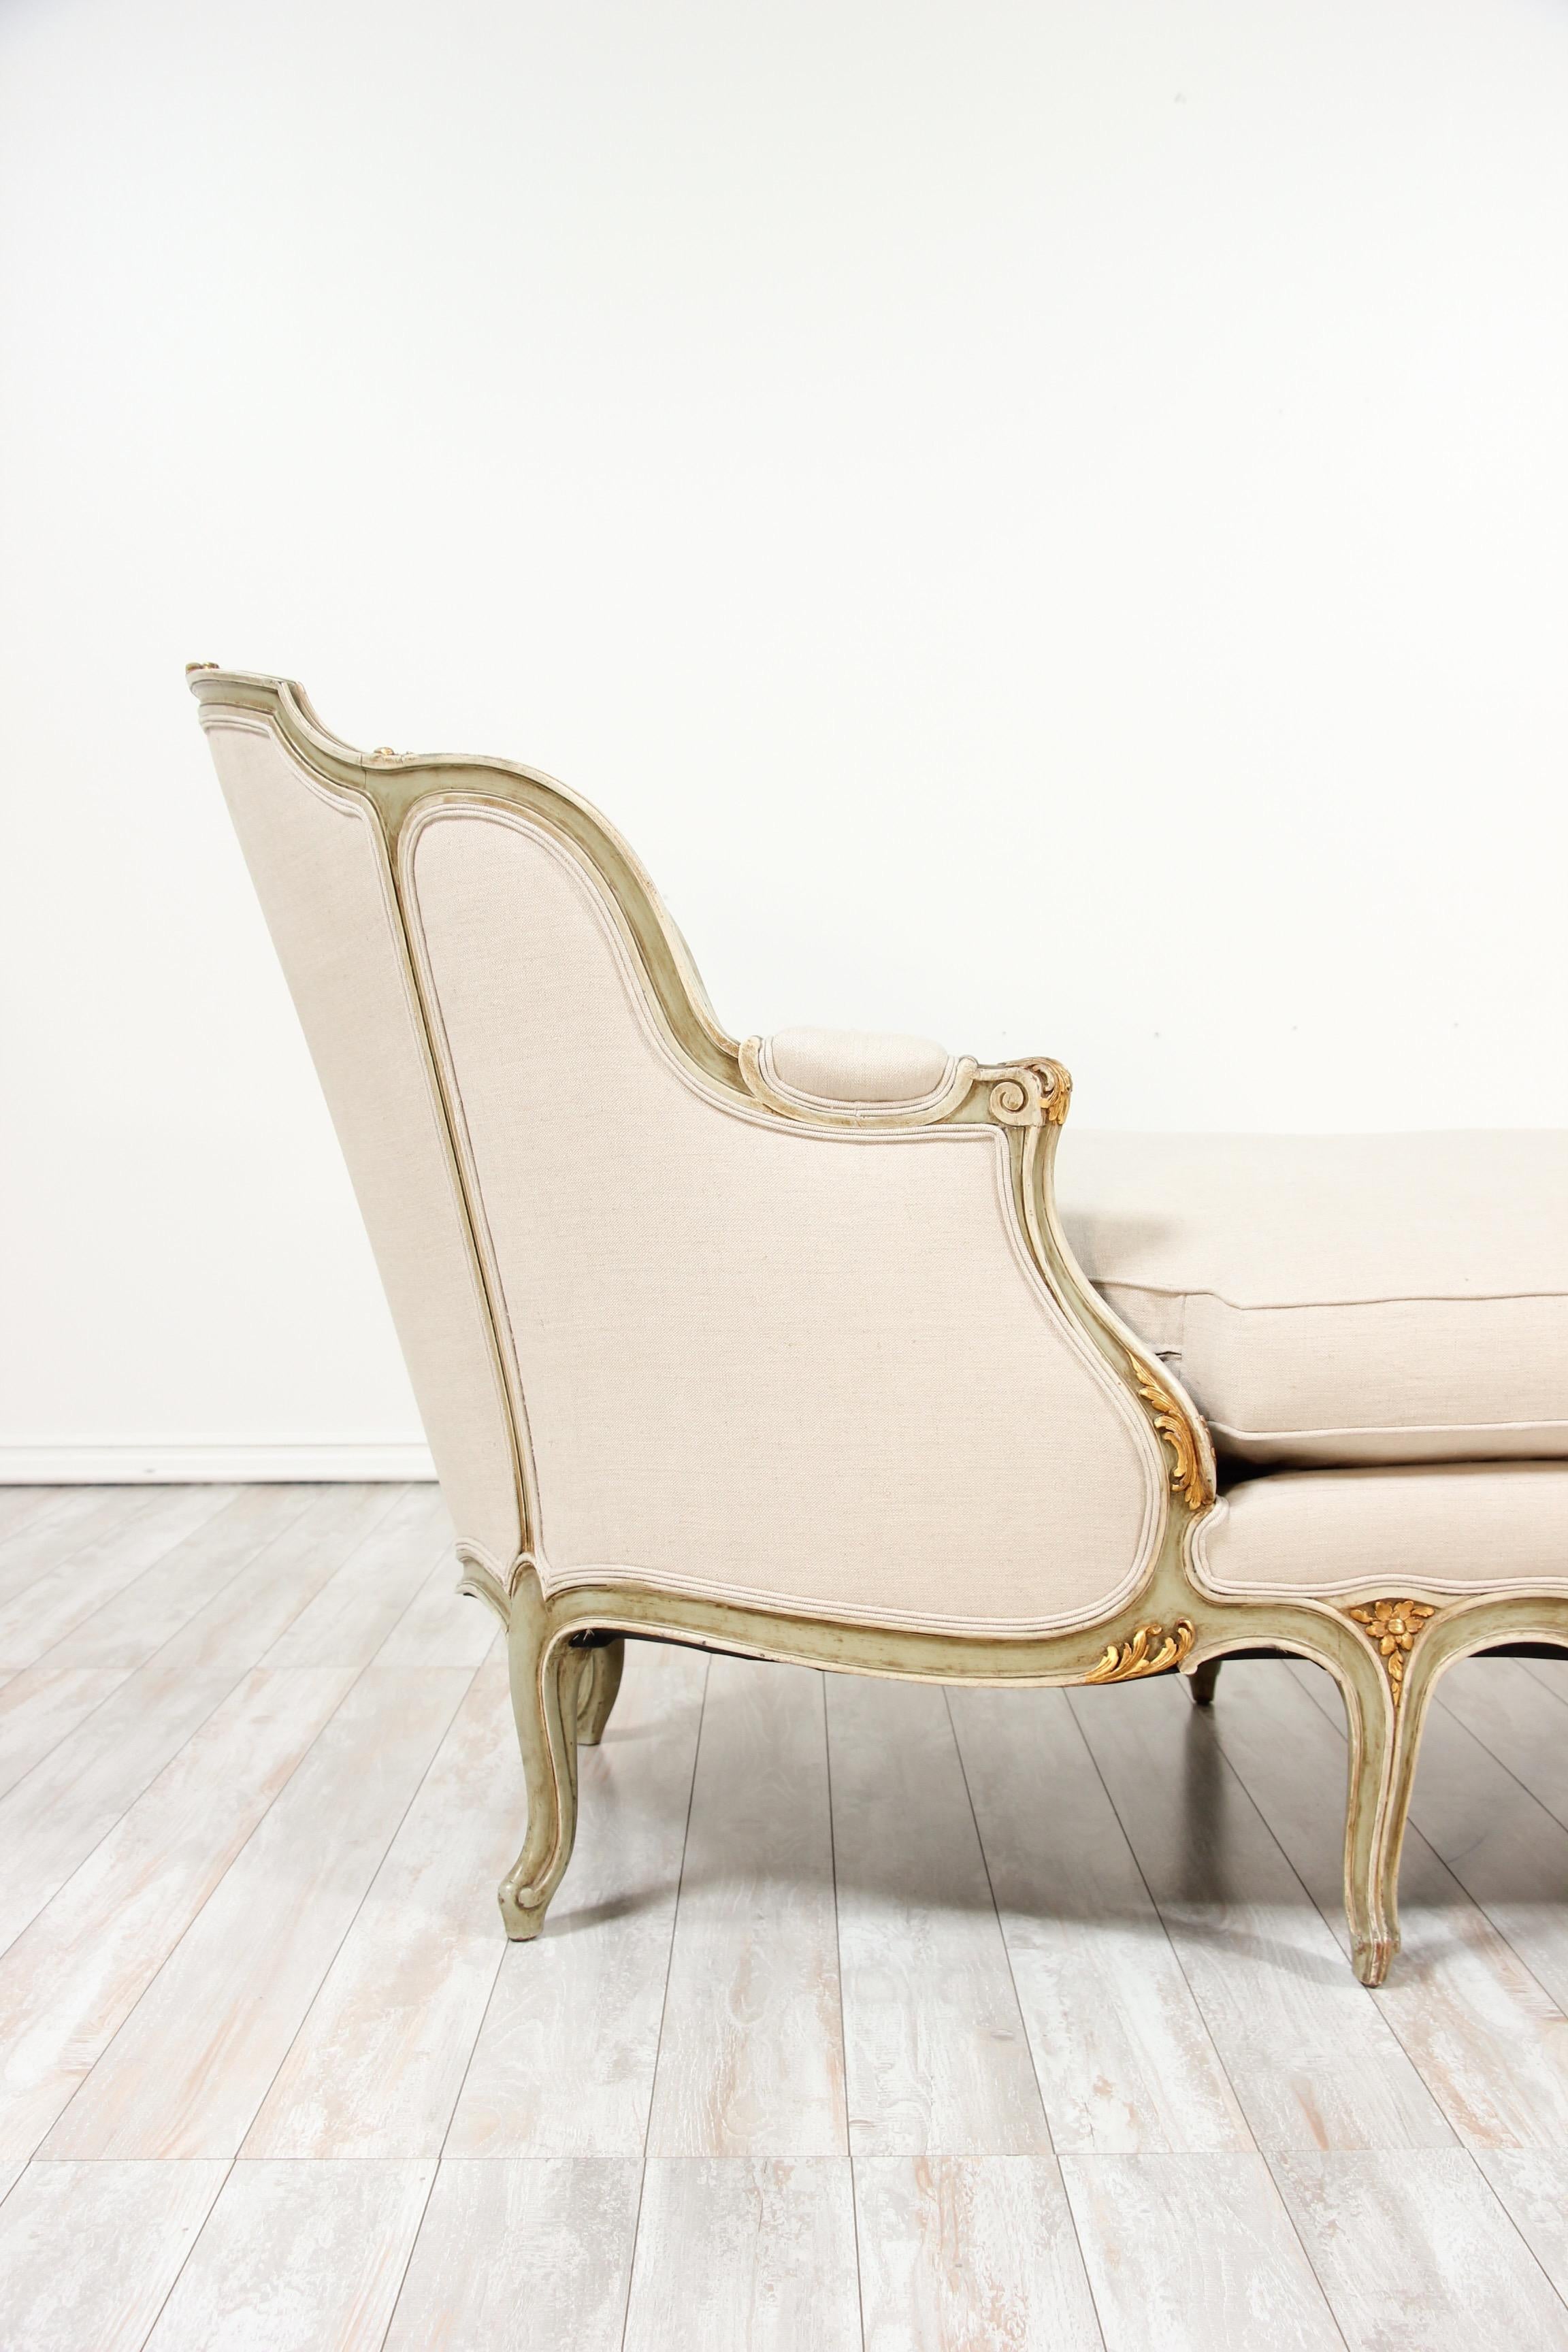 Mid-20th Century  Louis XV Style Painted And Parcel-Gilt Chaise Lounge